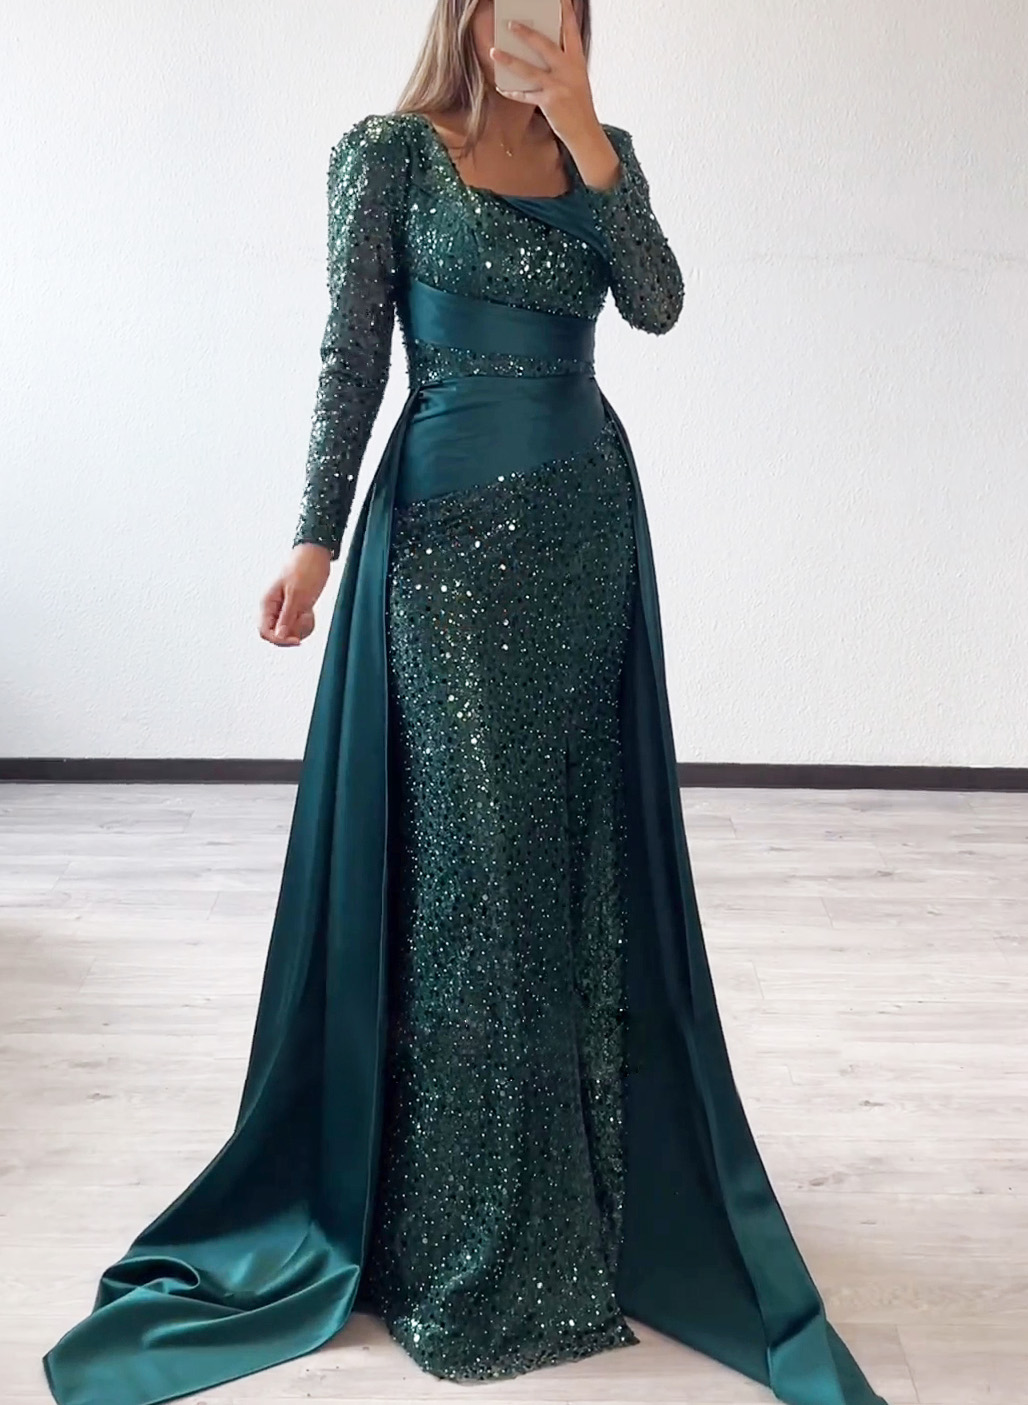 Square Neckline Long Sleeves Sequined Evening Dresses